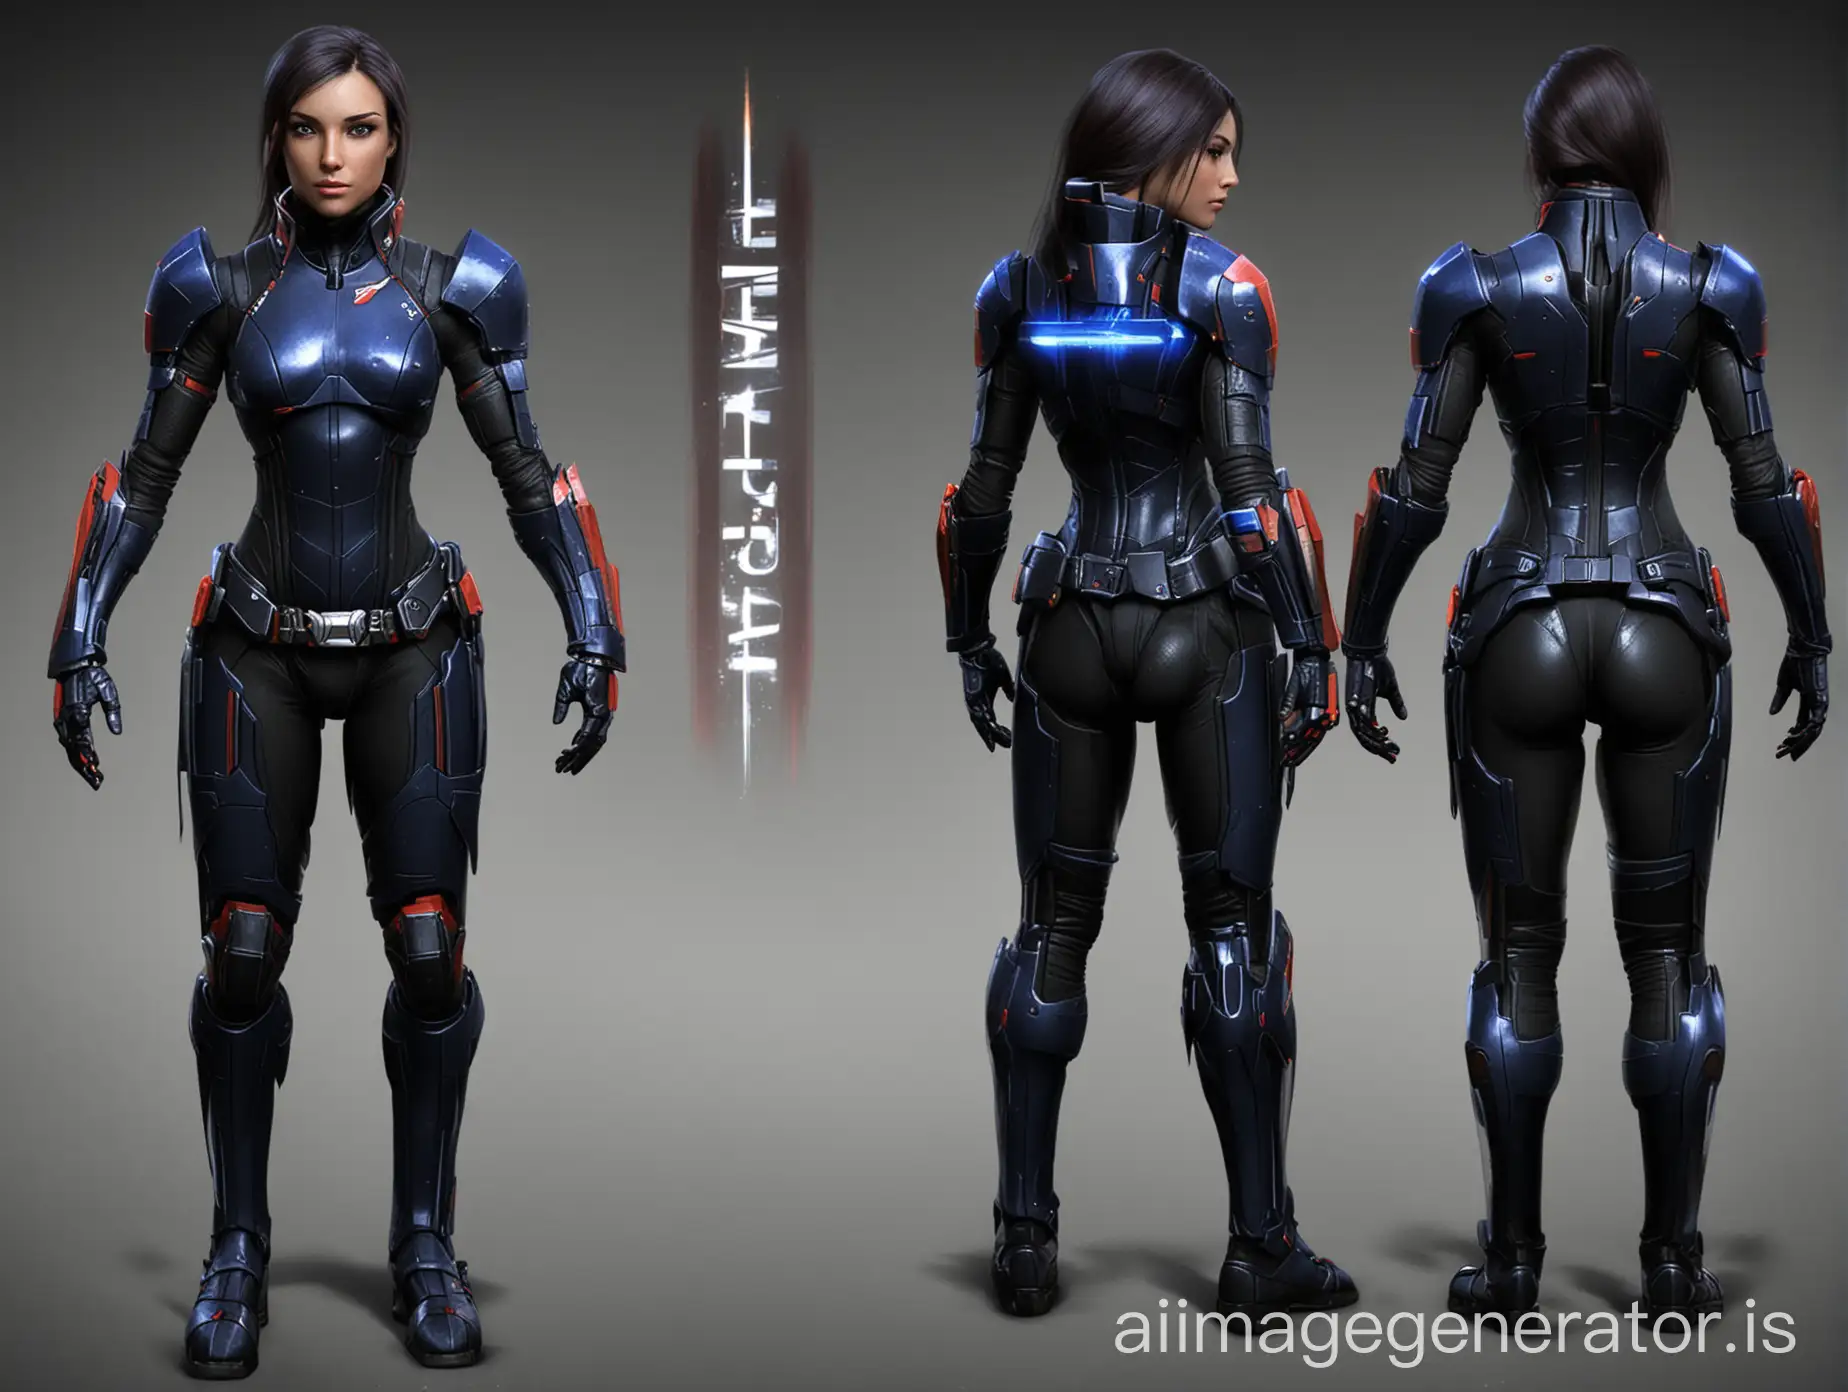 Female-Hourglass-Form-in-Black-Mass-Effect-Style-Armor-with-Indigo-Highlights